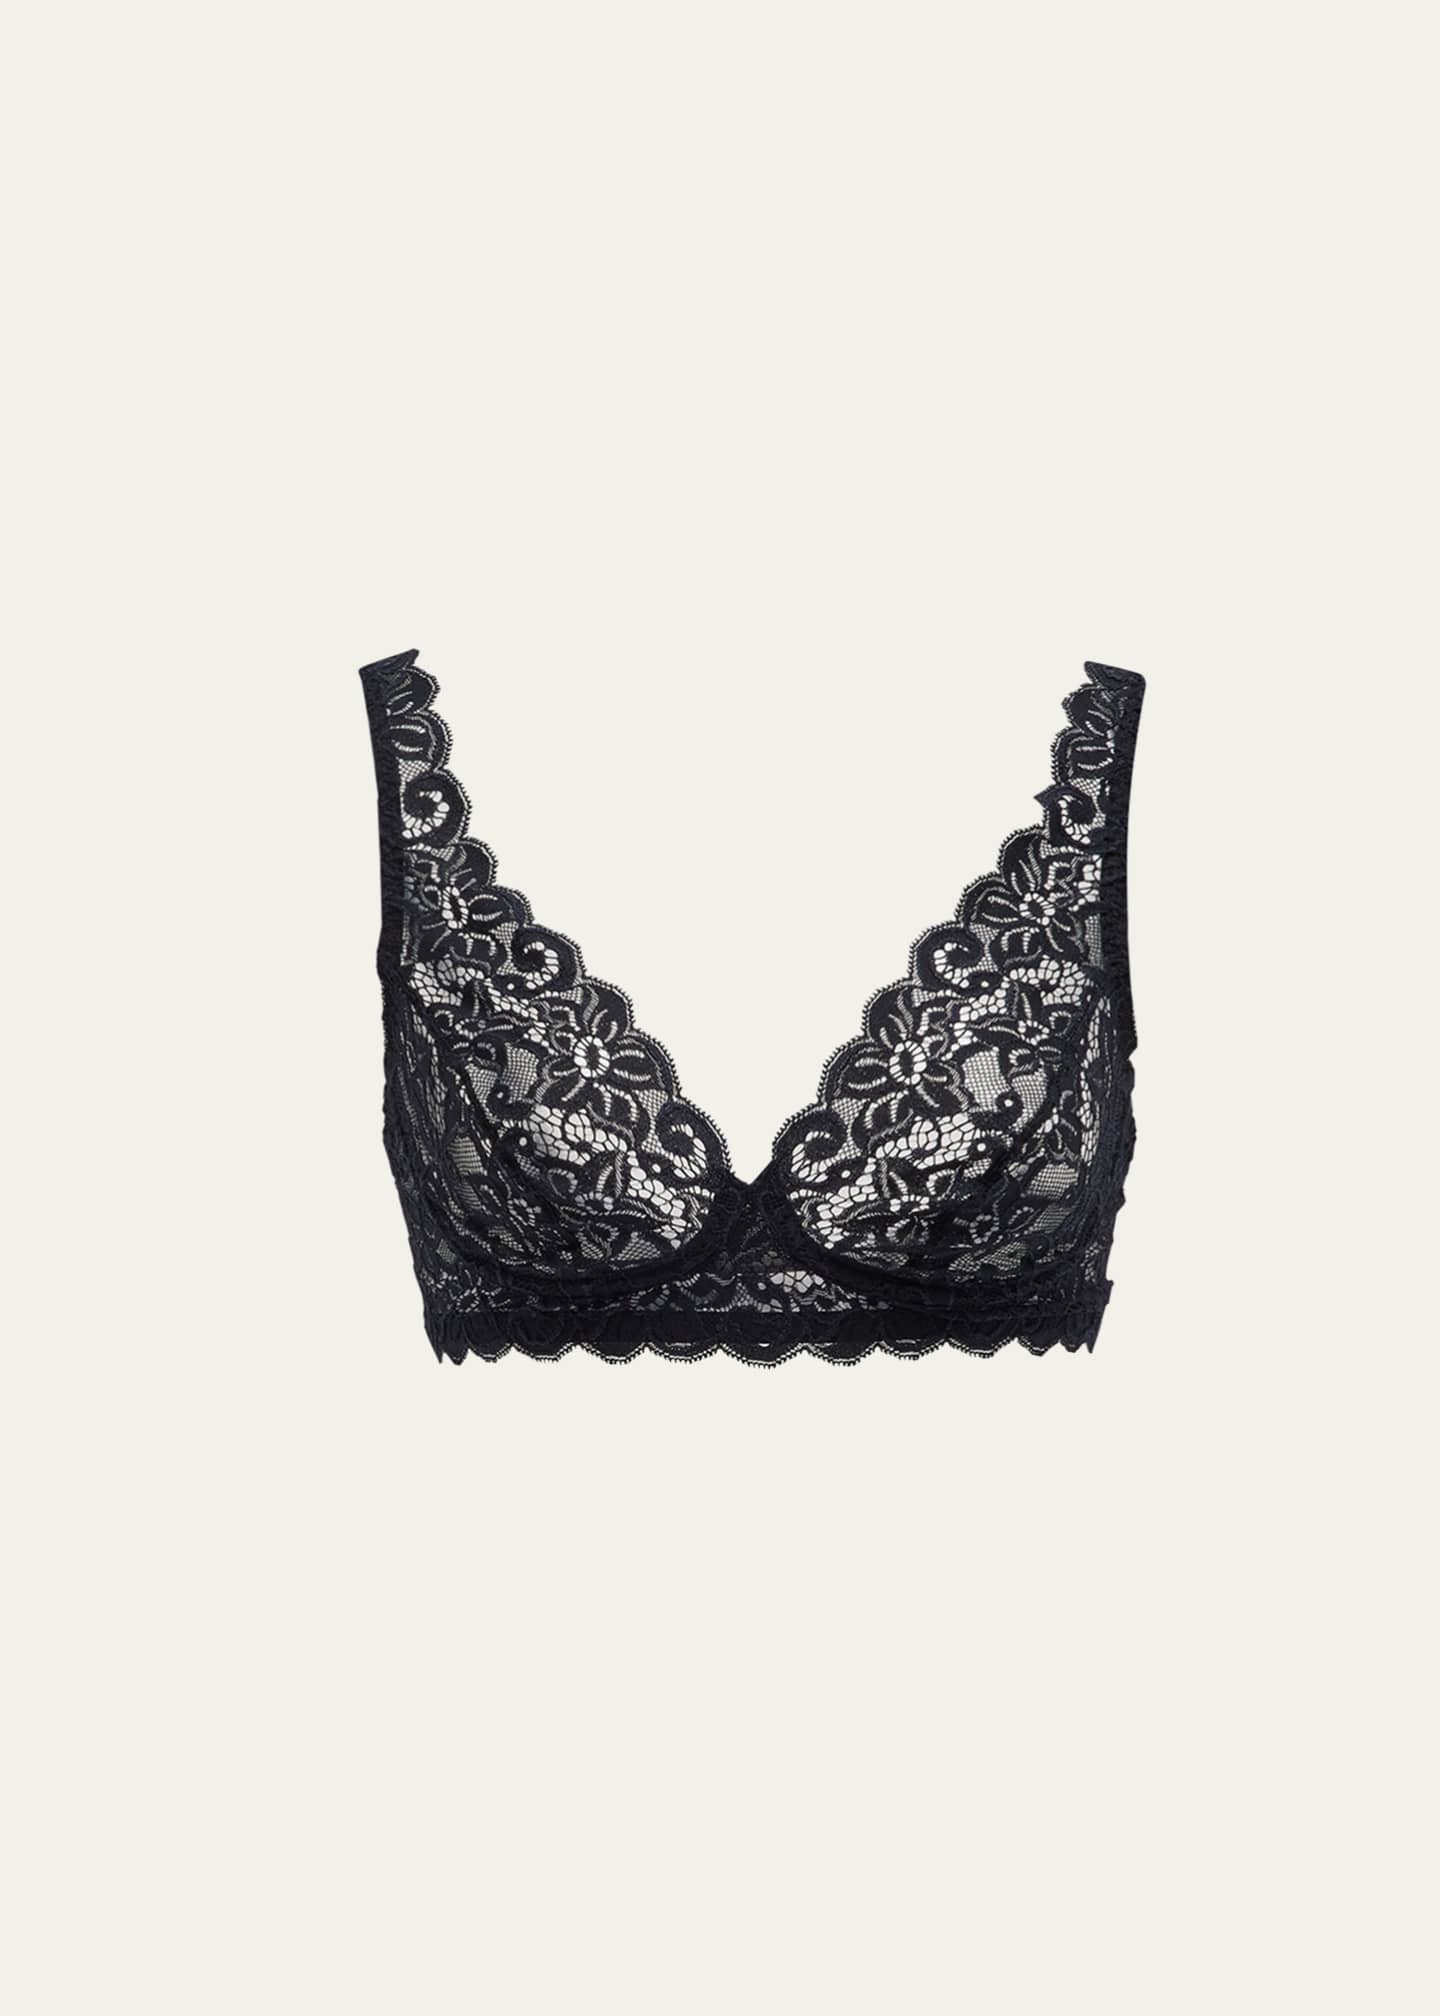 Cup bra in colour black from the Moments collection from HANRO